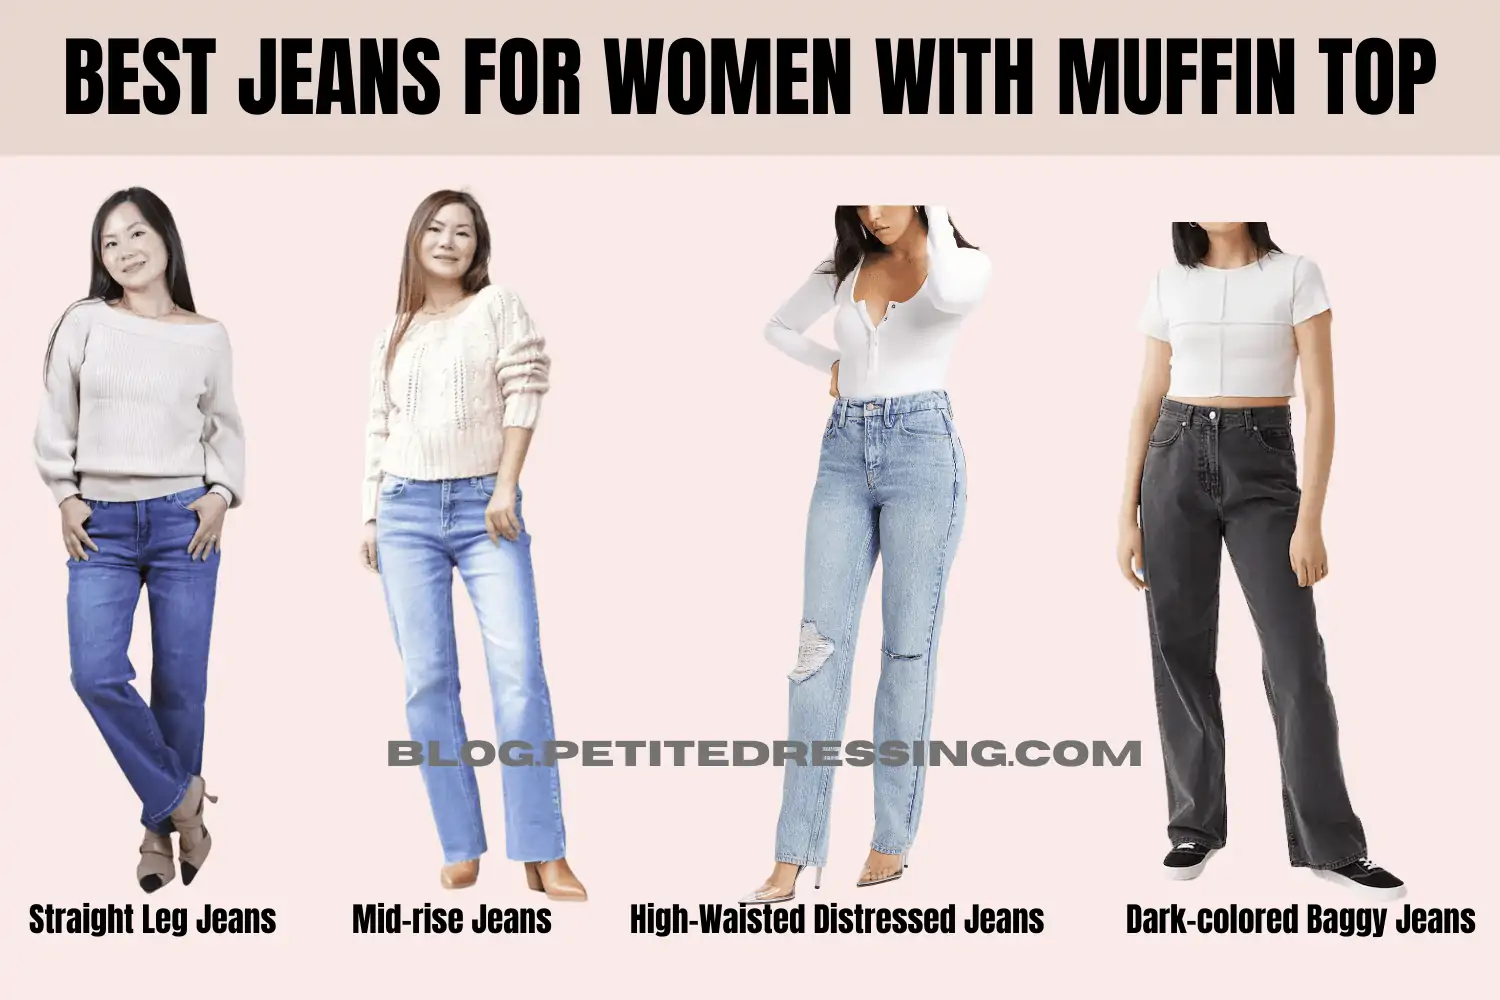 The Complete Jeans Guide for Women with Muffin Top - Petite Dressing